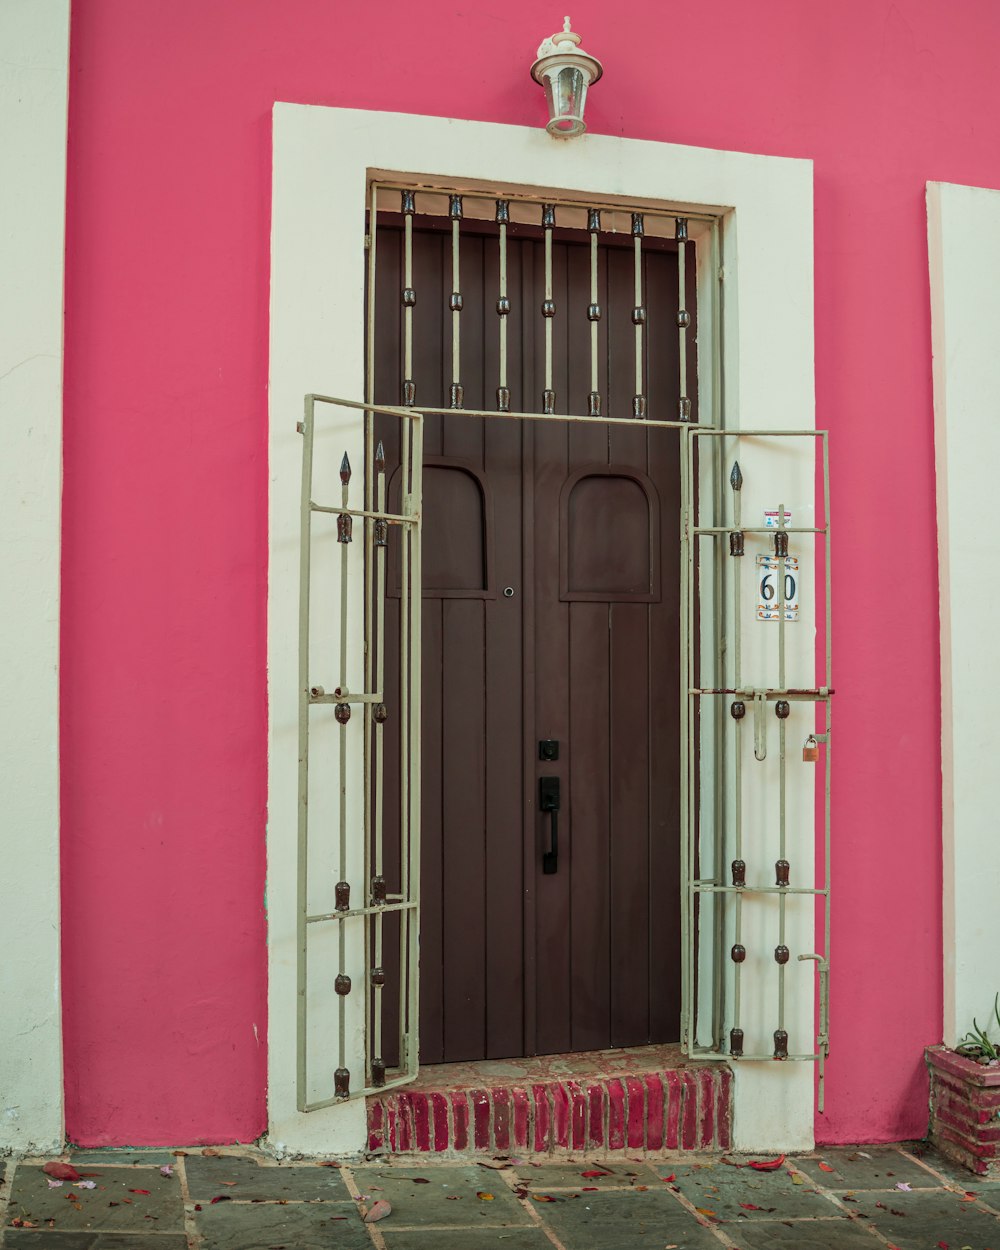 a pink building with a brown door and window